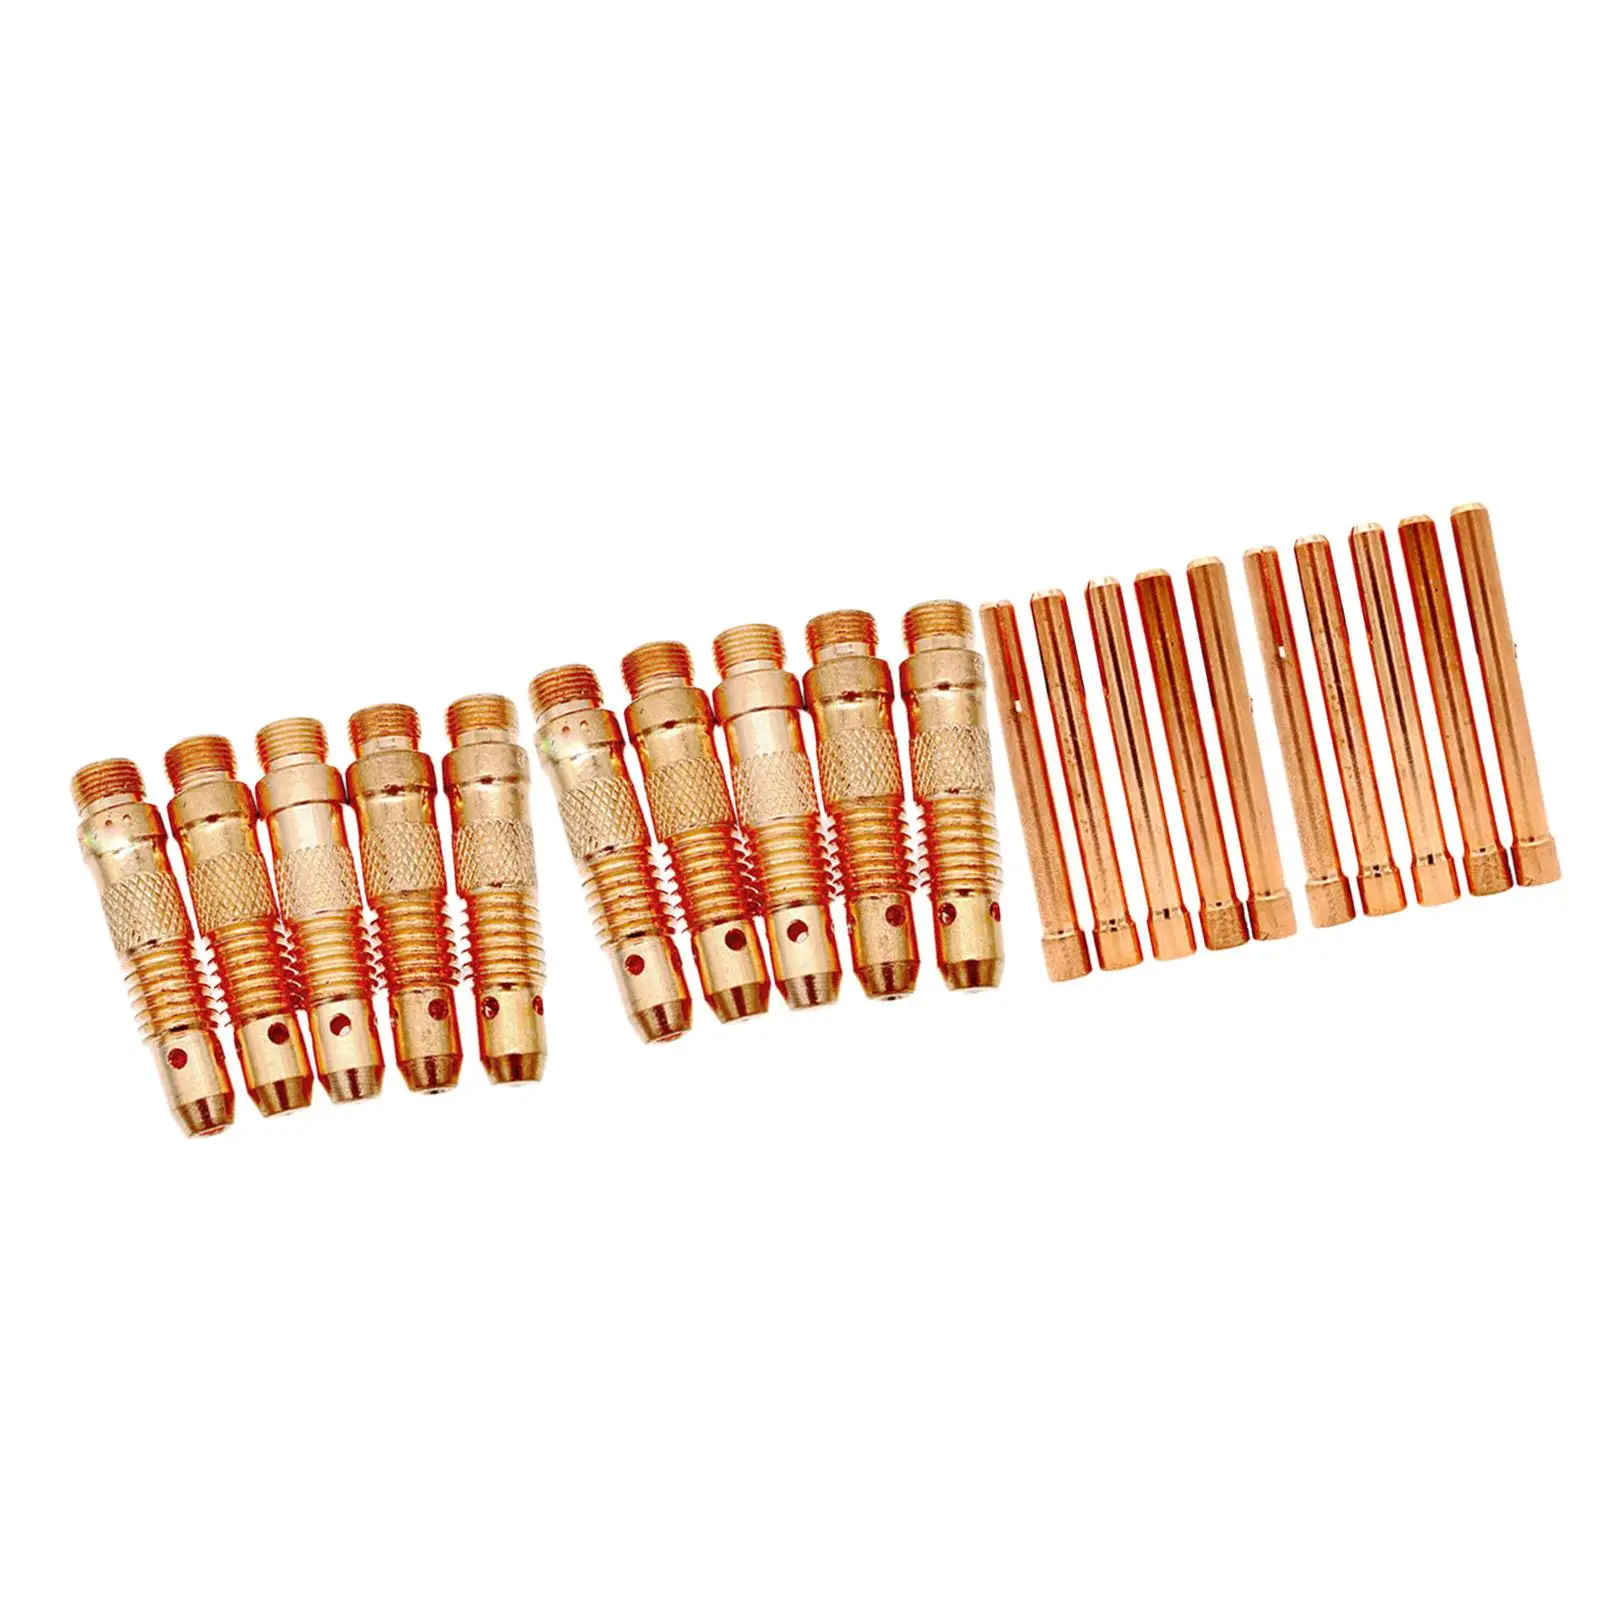 20 Pieces Copper Collets Rust Resistance Consumables Kit for 17 18 26 Series TIG Welding Equipment Replacement Accessory Parts